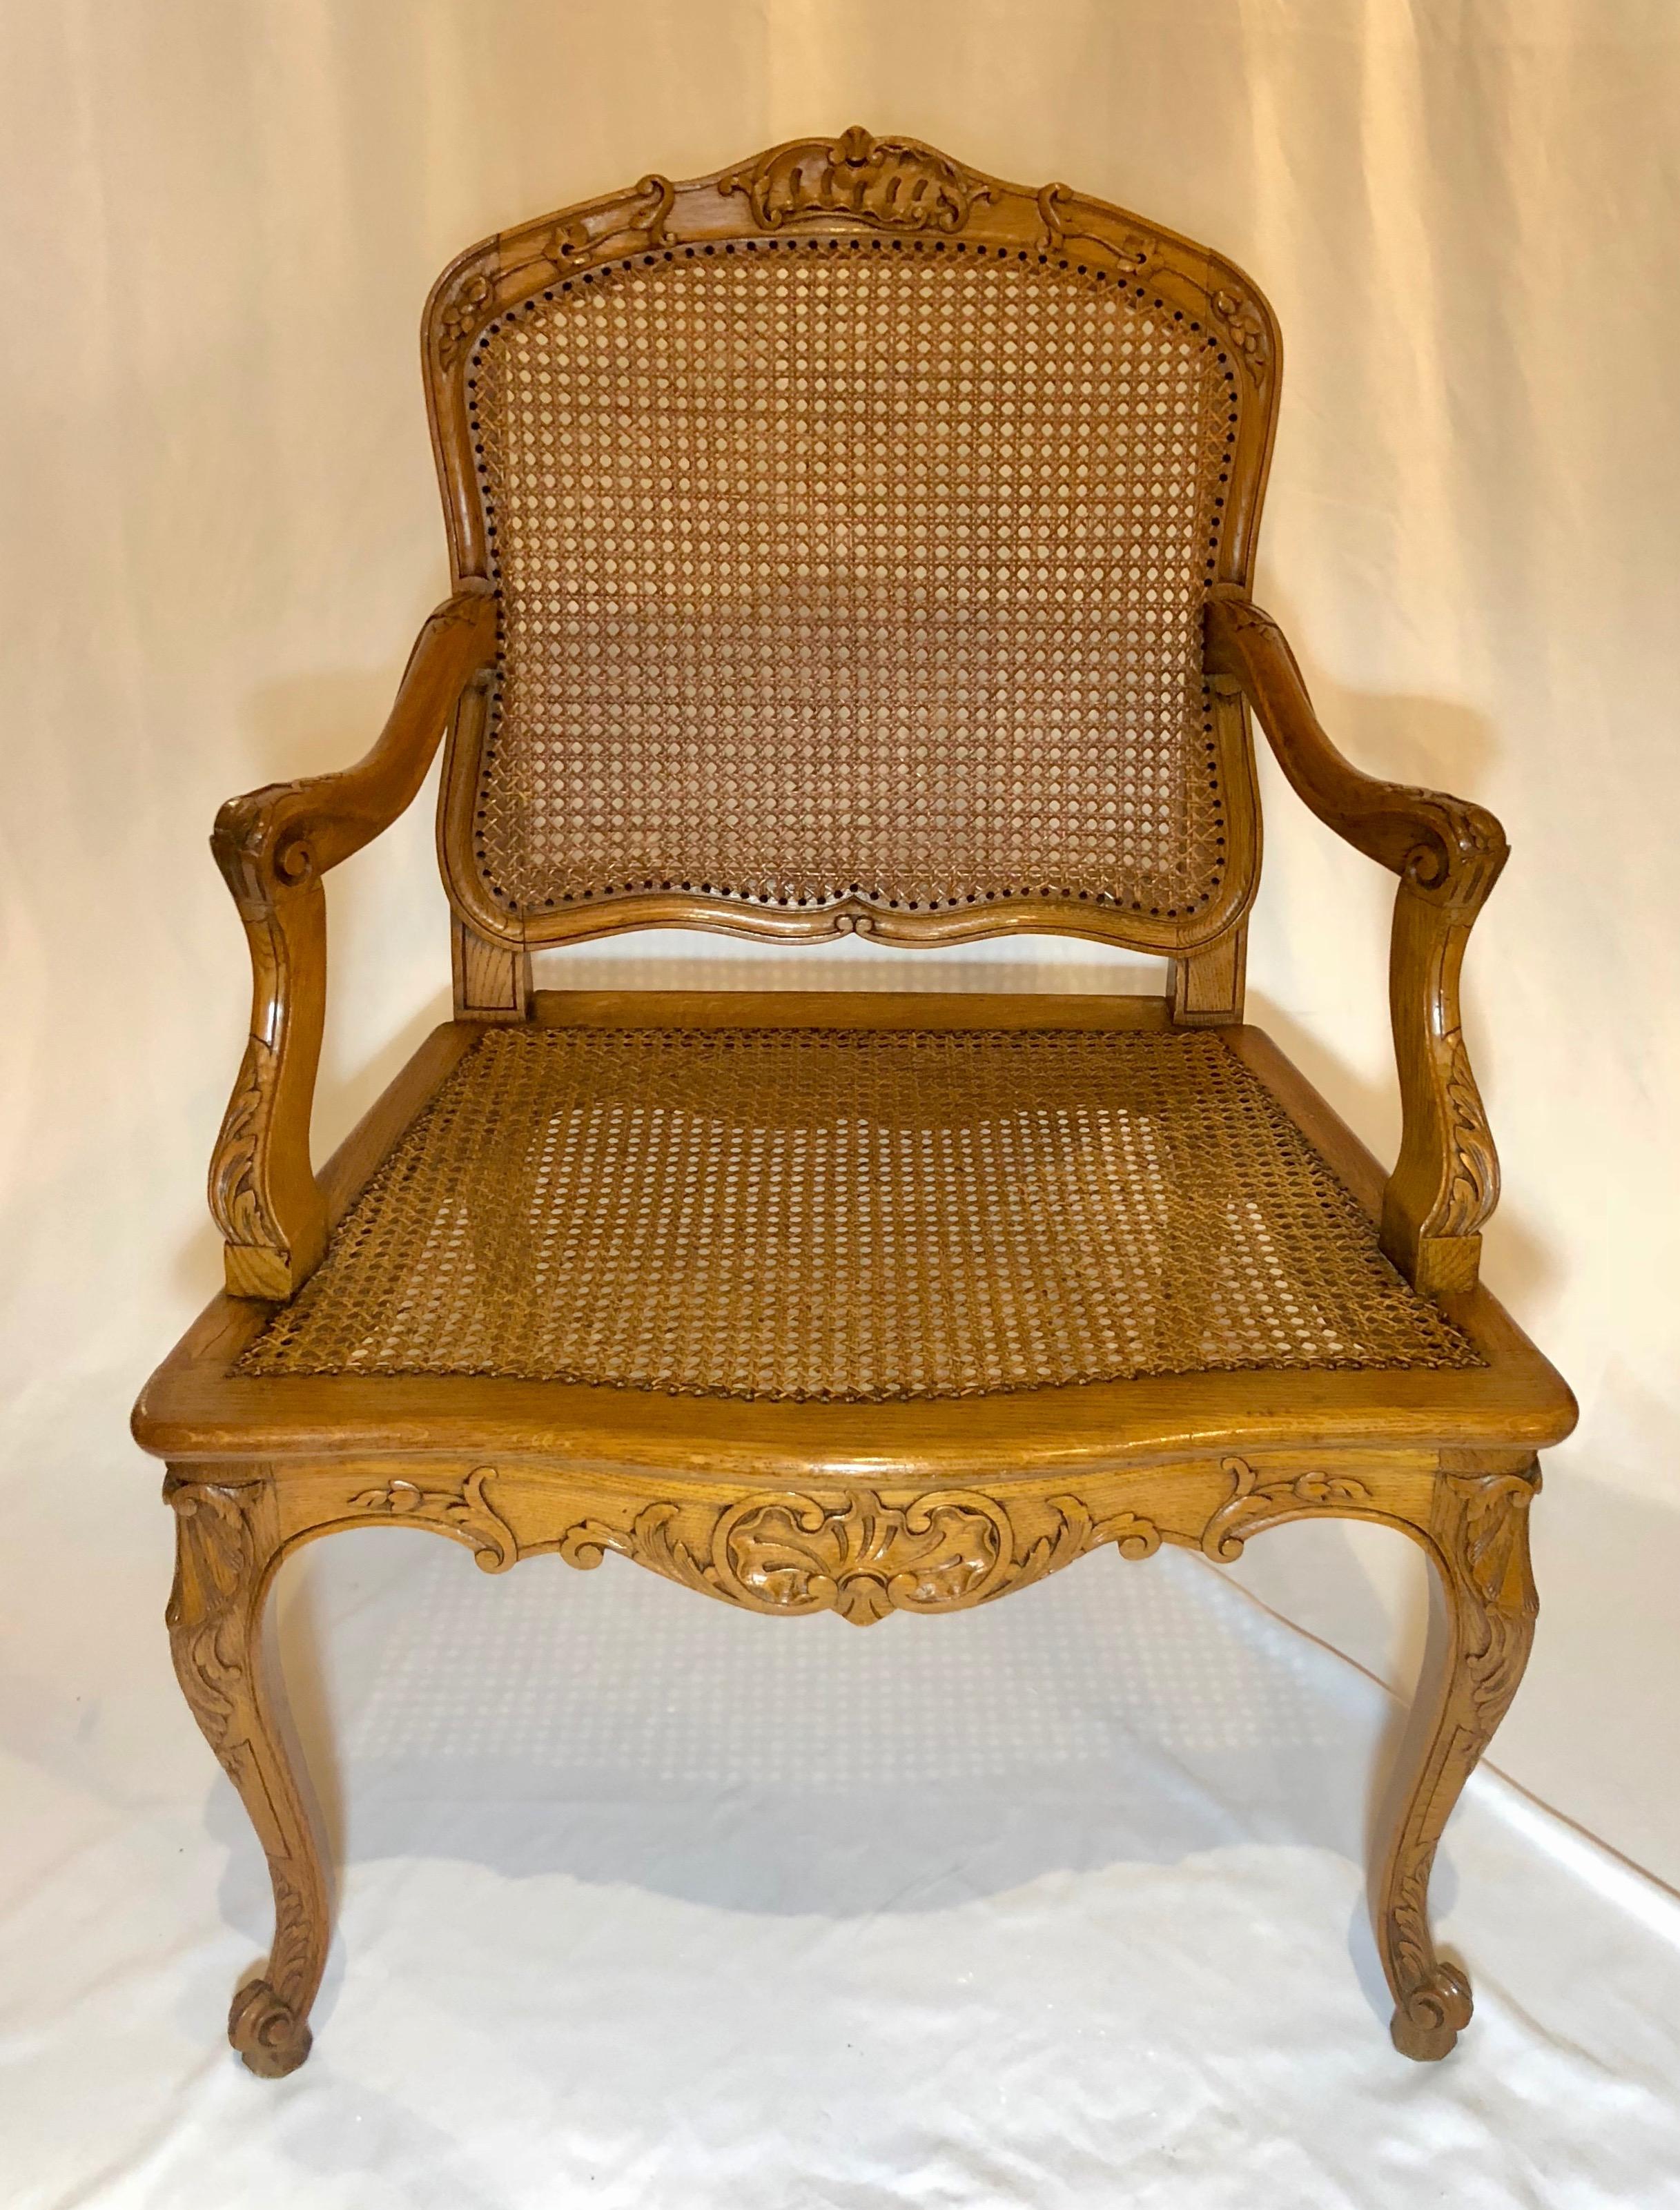 Pair of French antique carved elm armchairs, circa 1910-1920.